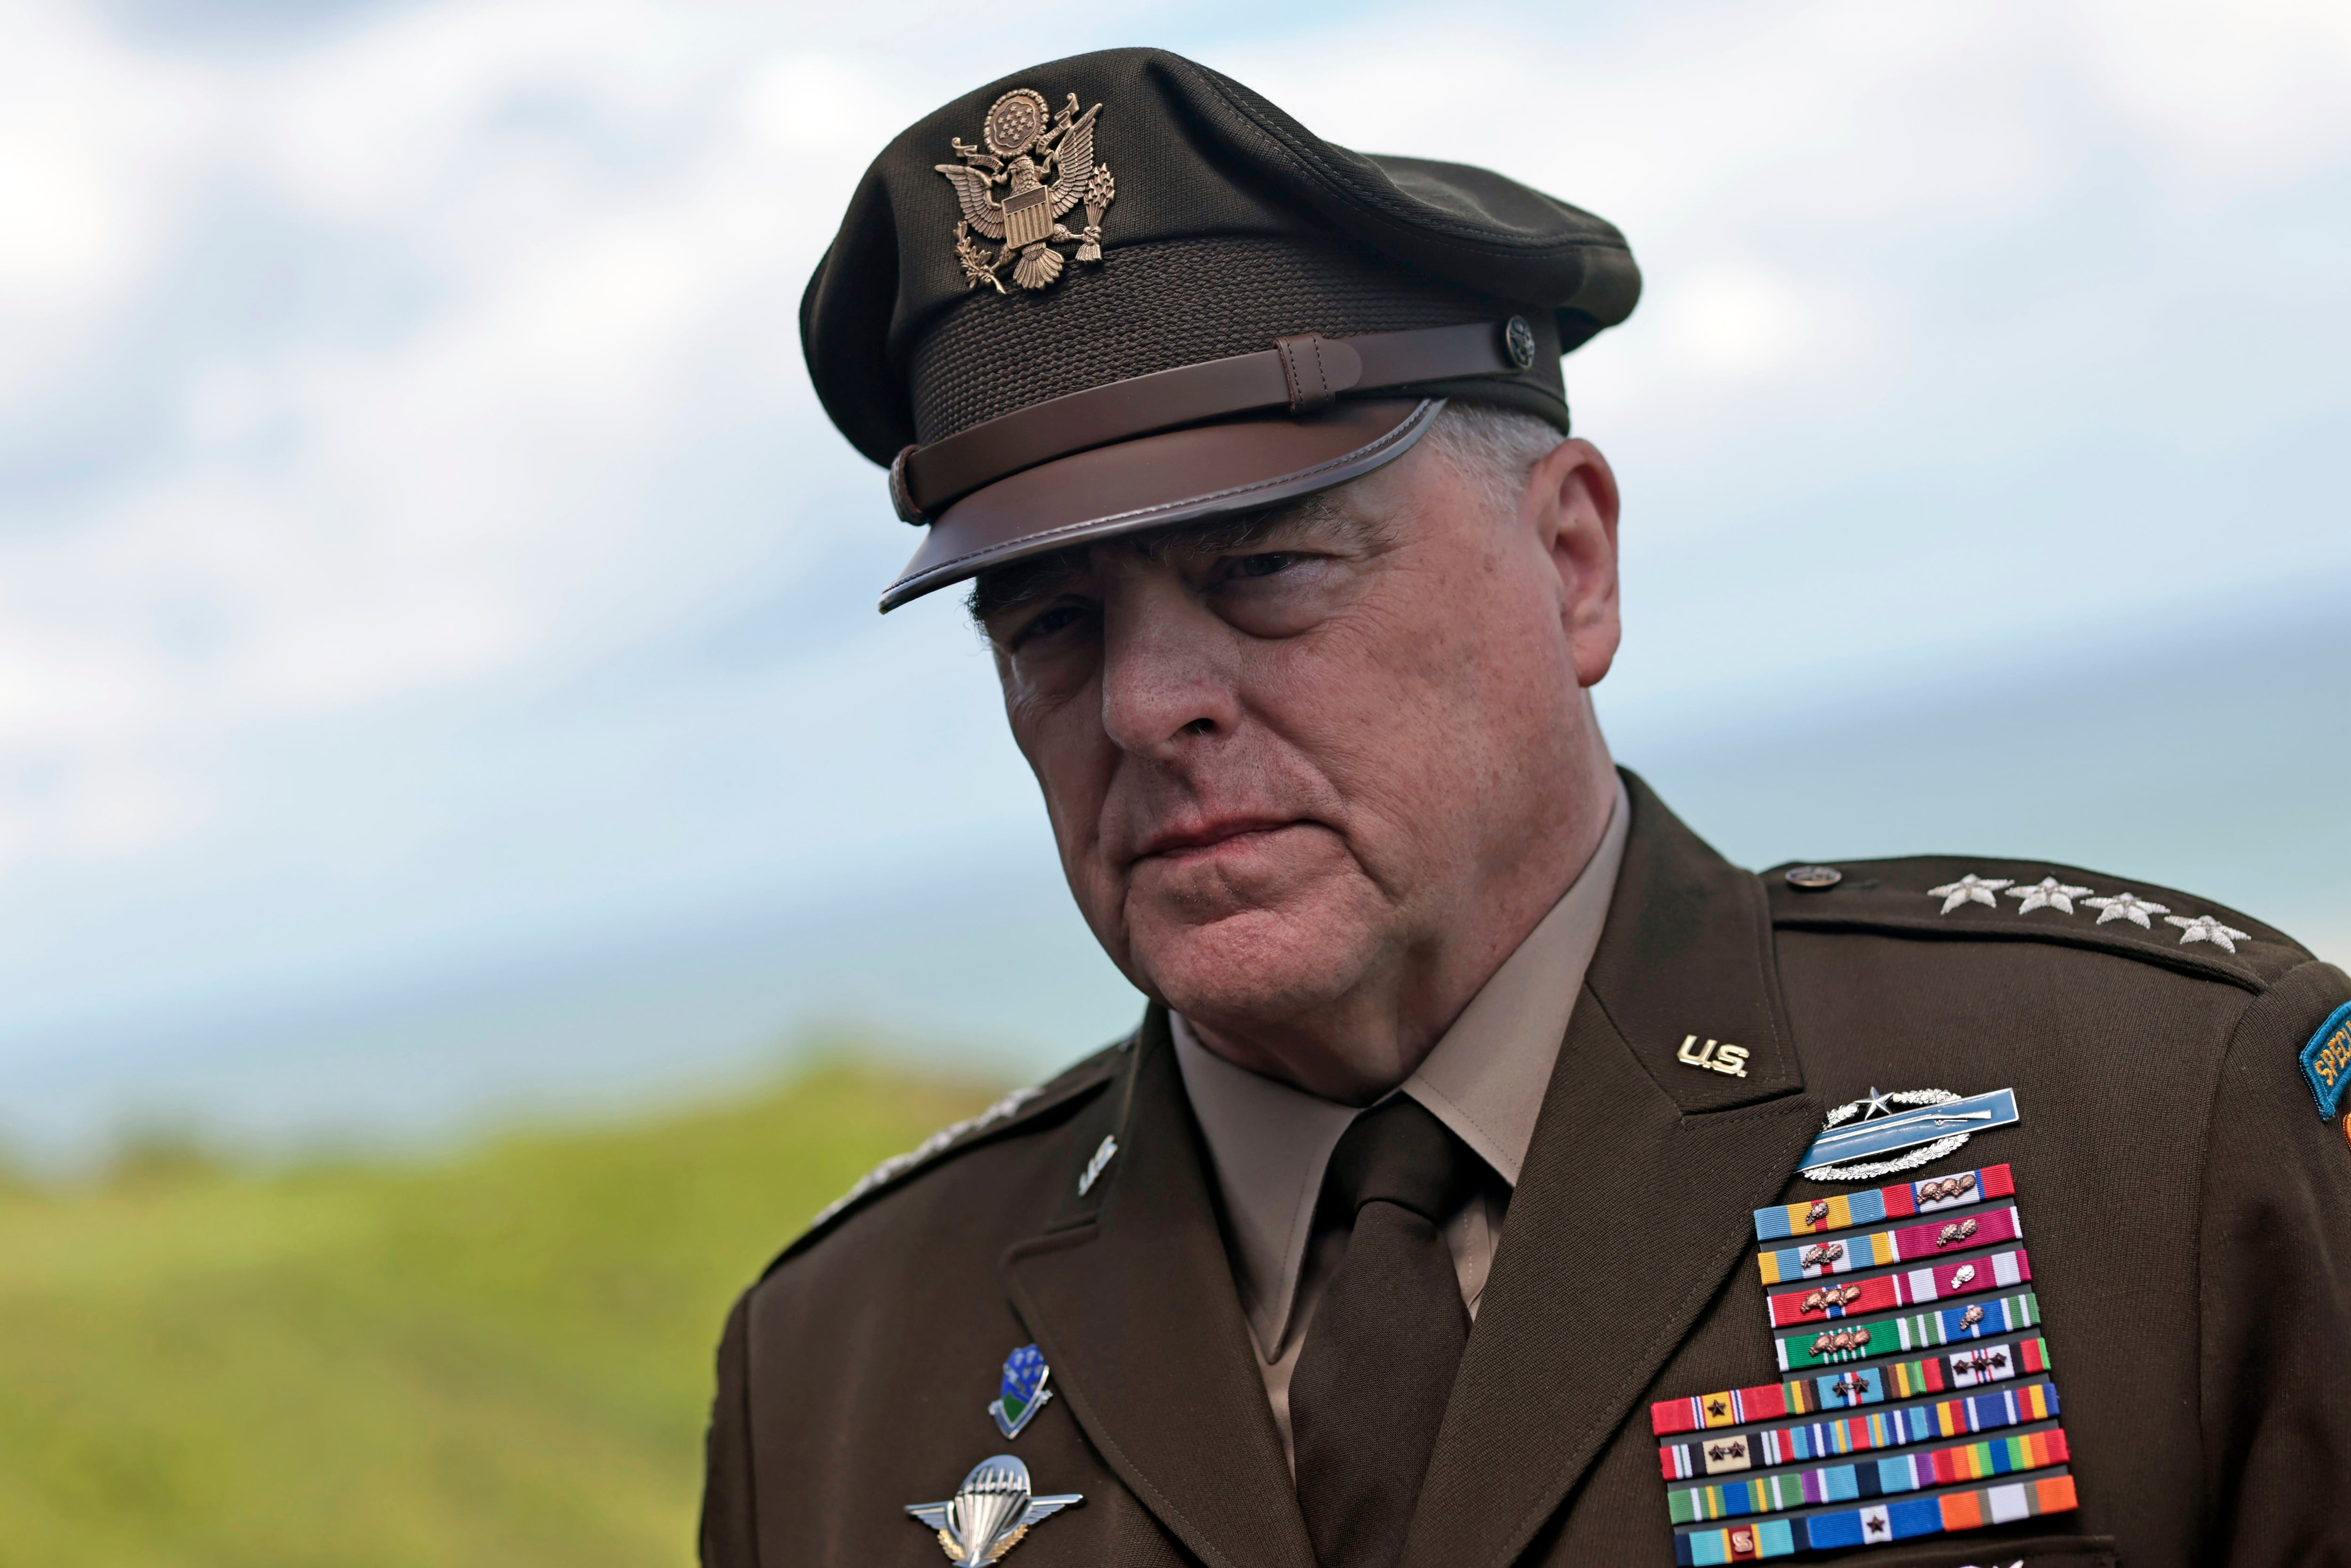 Top US general: Ukraine will keep getting 'significant' support